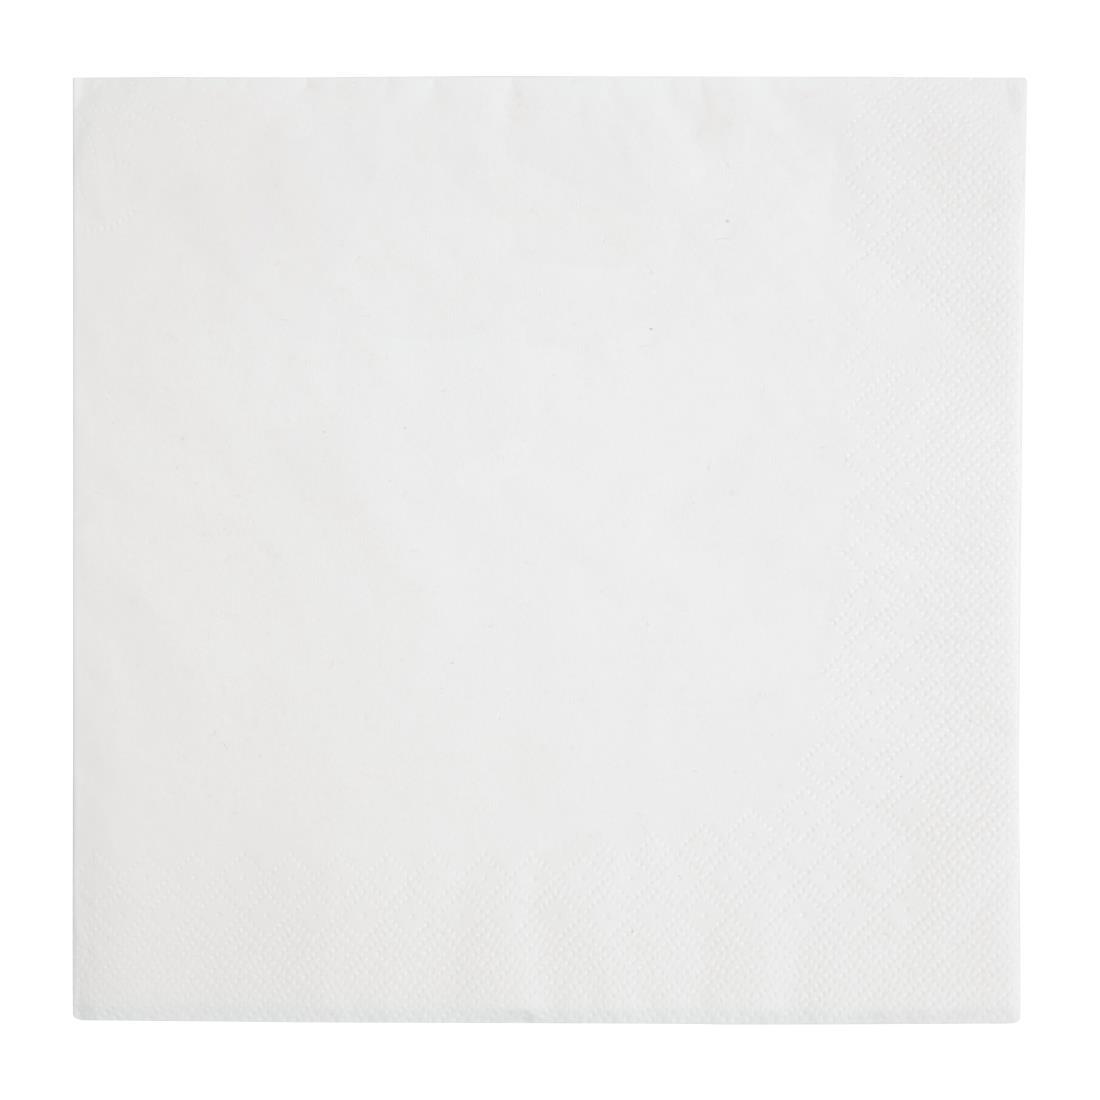 Fiesta Recyclable Dinner Napkin White 40x40cm 3ply 1/4 Fold (Pack of 1000) - FE251  - 2